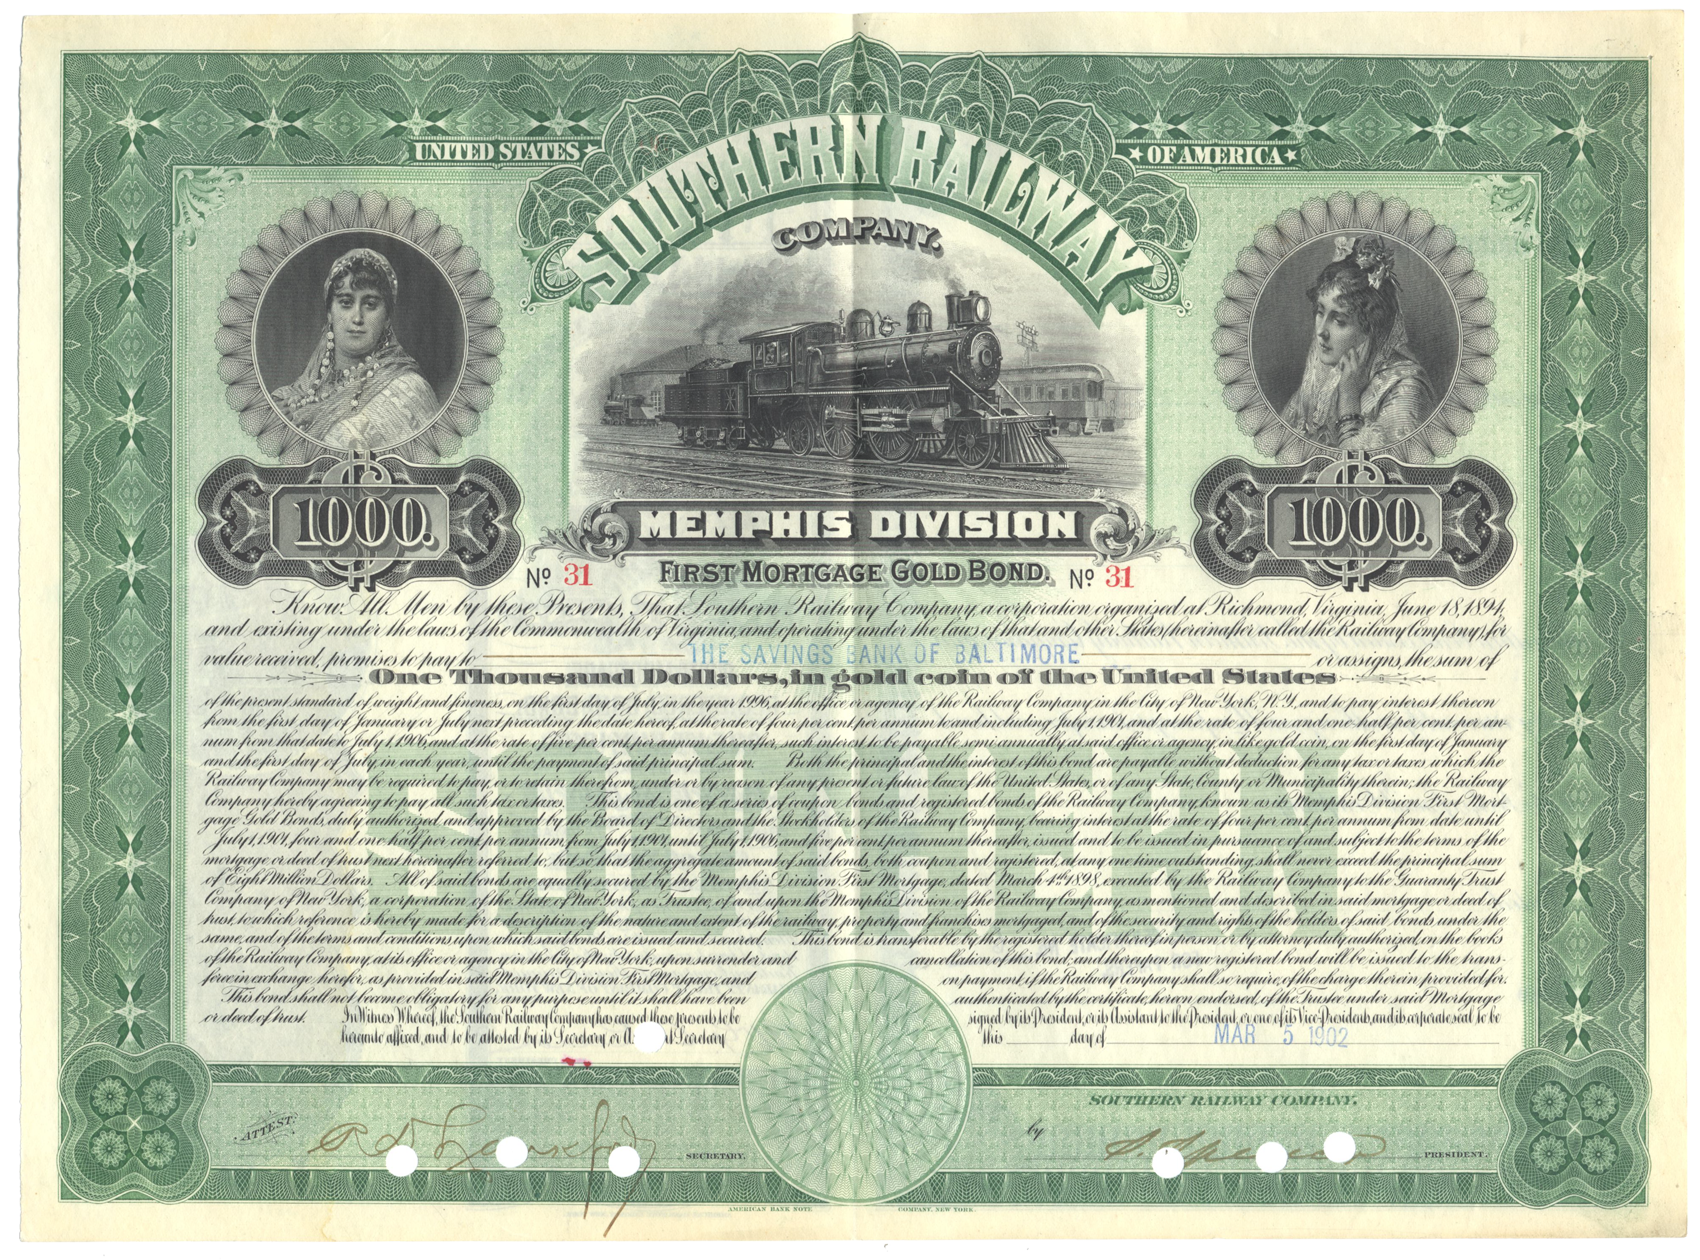 Southern Railway Company Memphis Division Bond Certificate